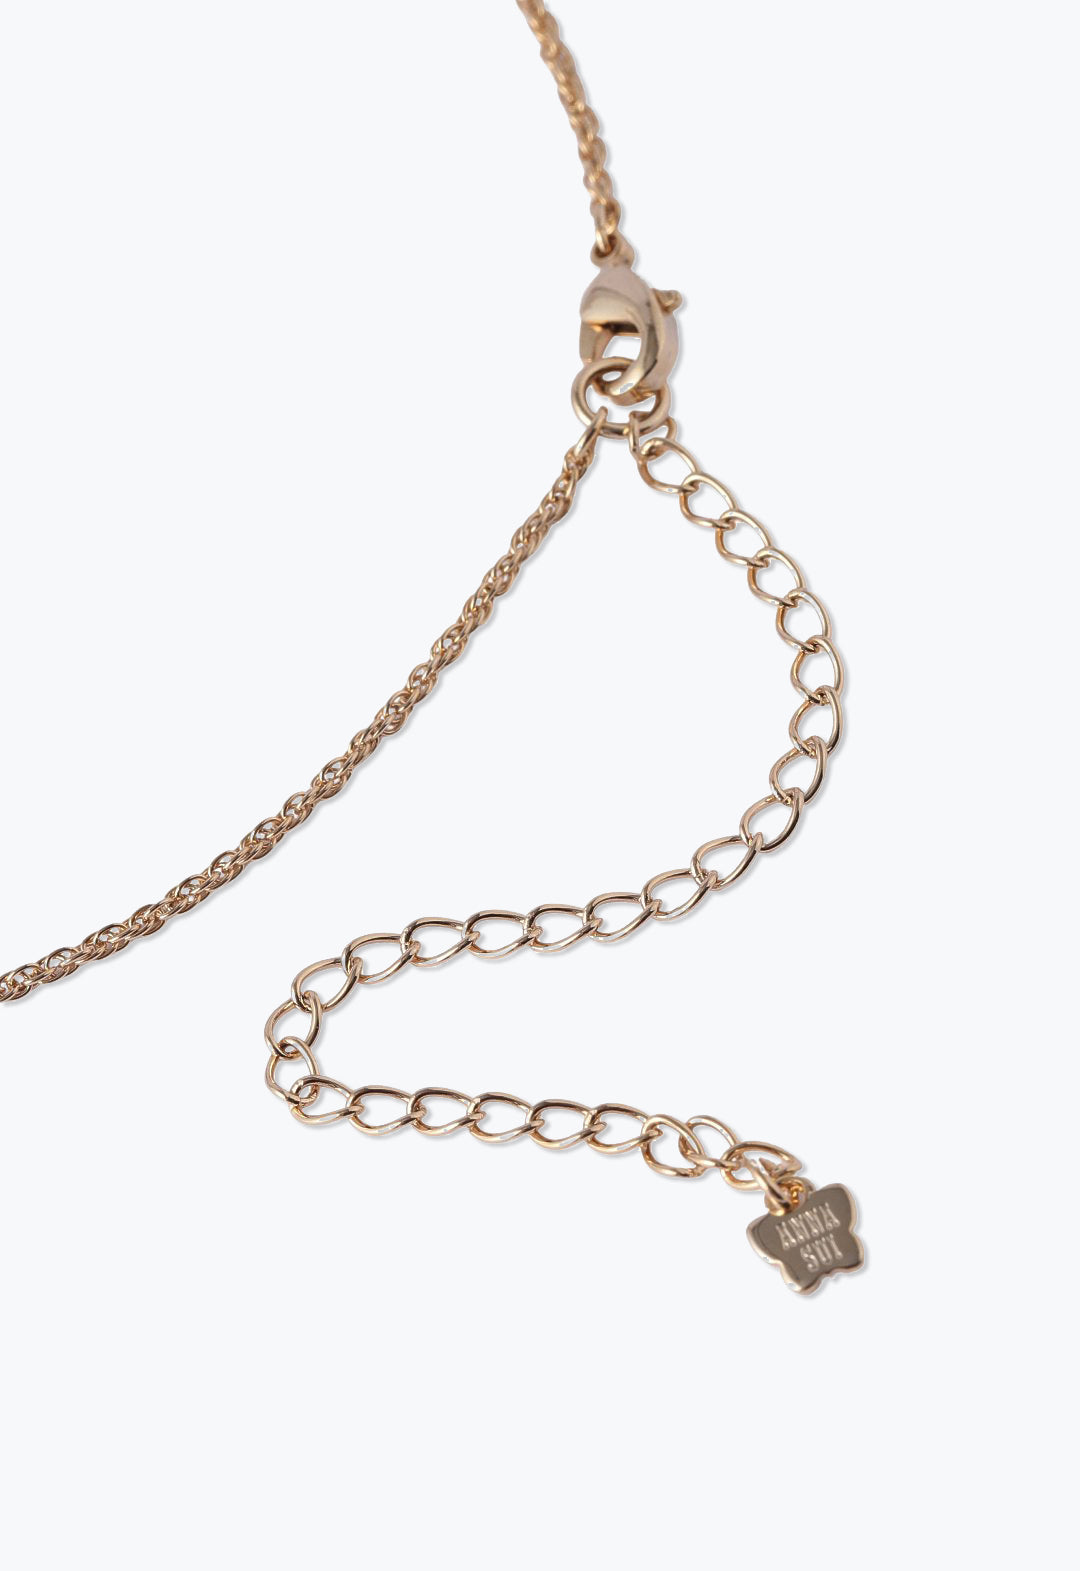 Gold color chain, a lobster claw clasp with large links for adjustability, Anna Sui imprint on a tag